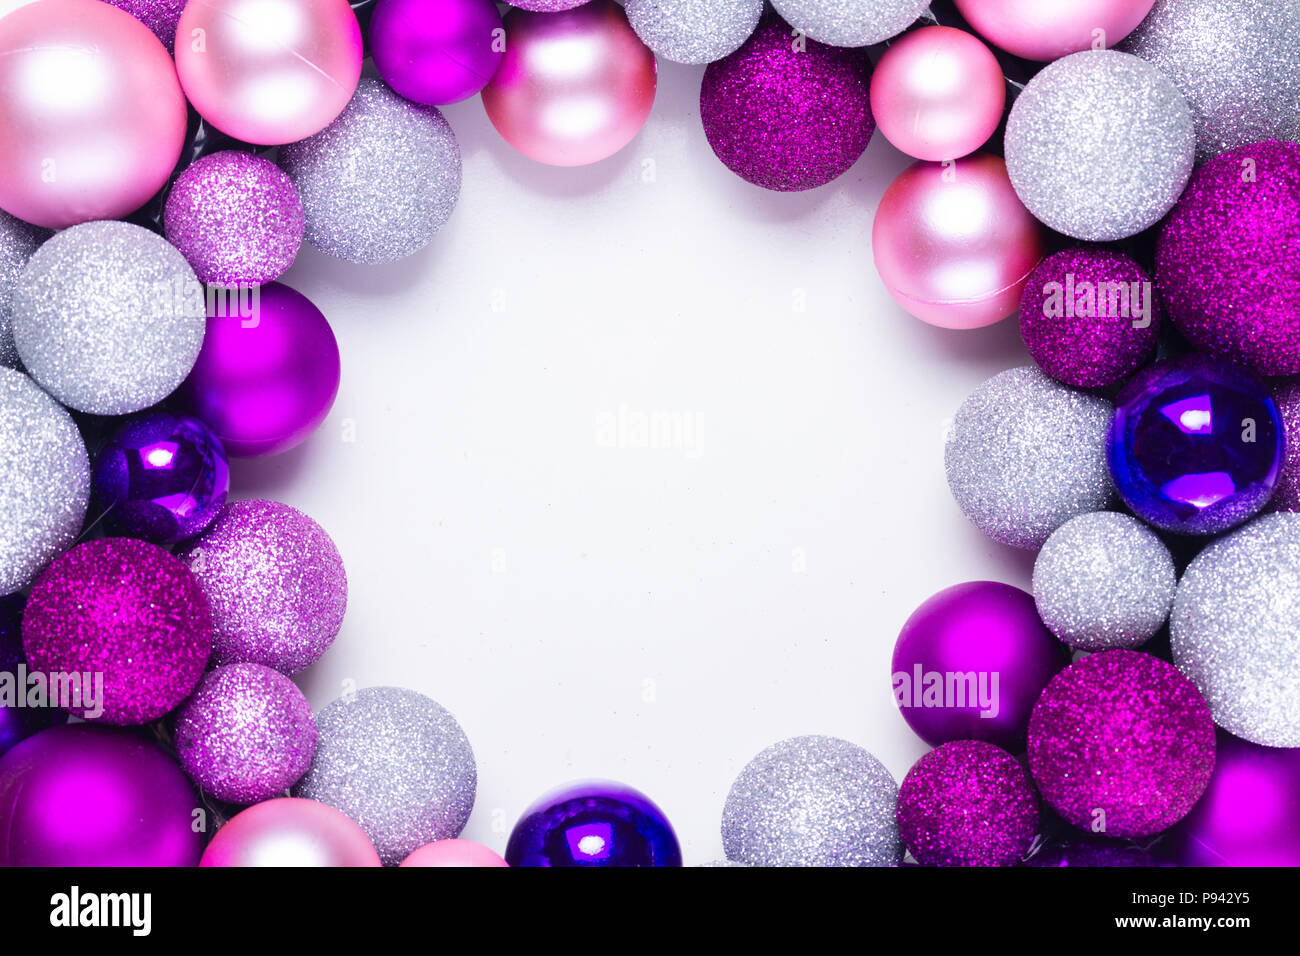 Christmas Flat Lay Round Frame With Silver Pink Abd Violet Glass